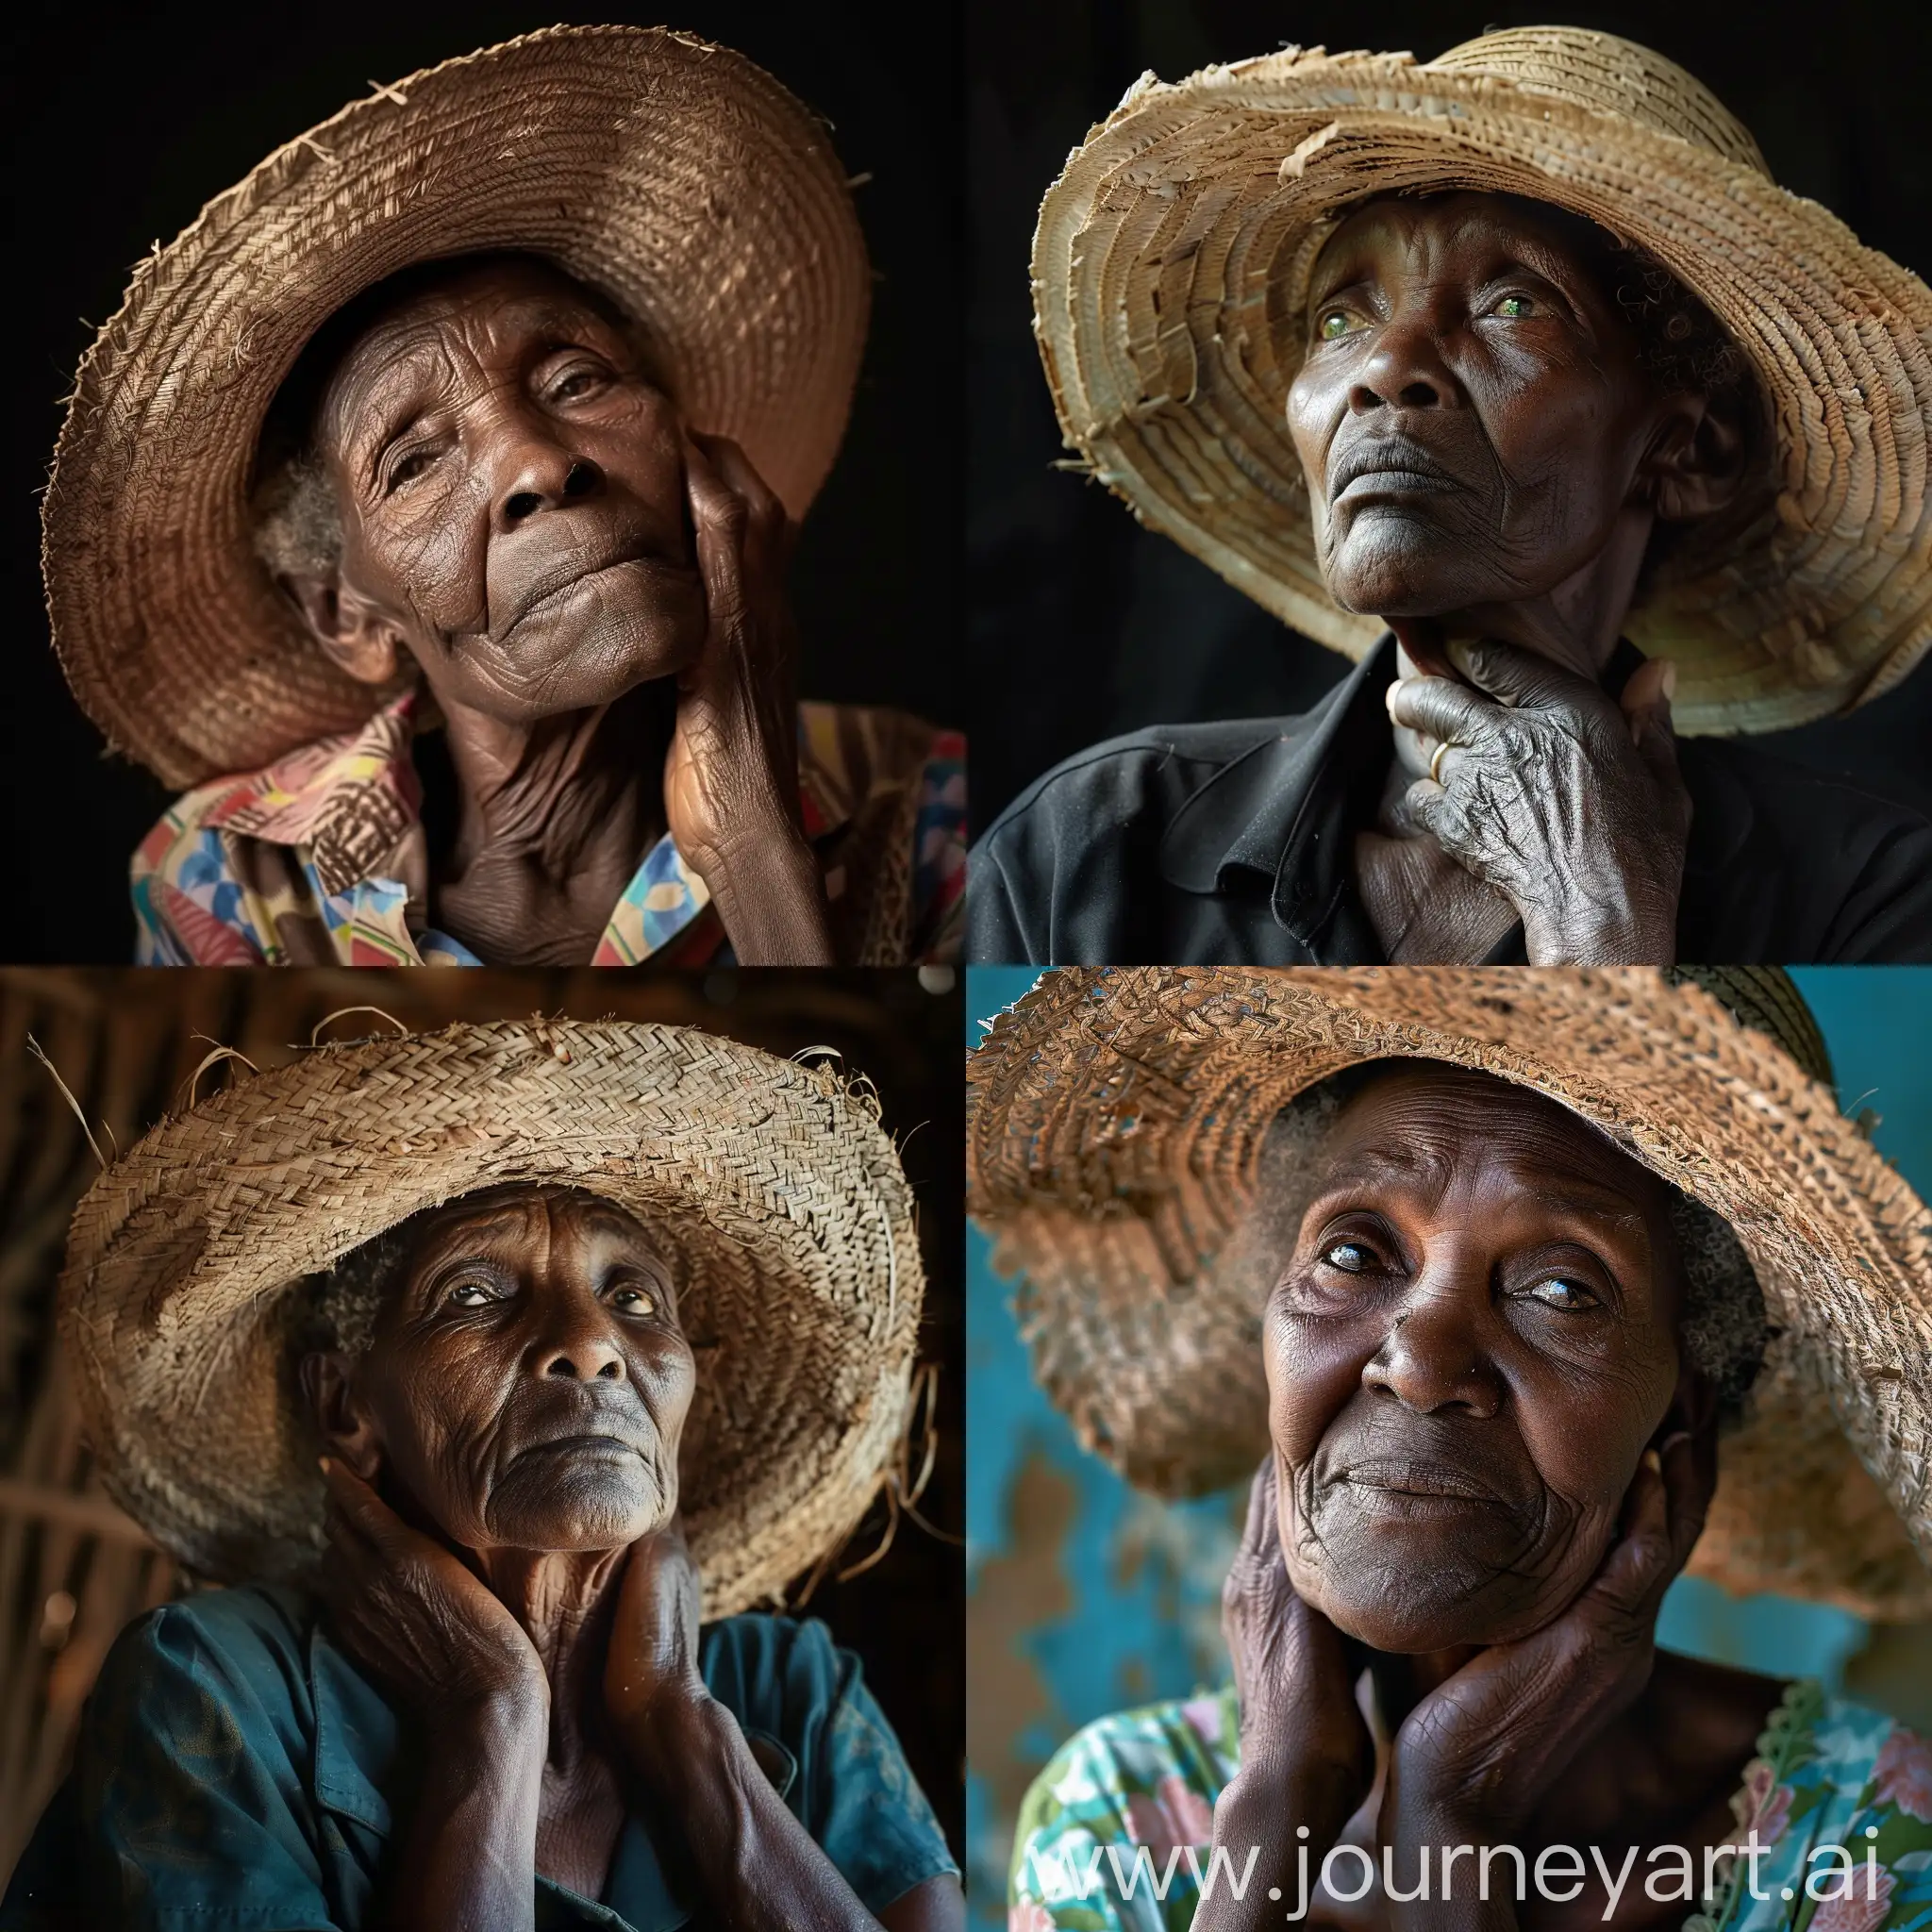 Old African woman wearing an old straw hat. She is holding her neck